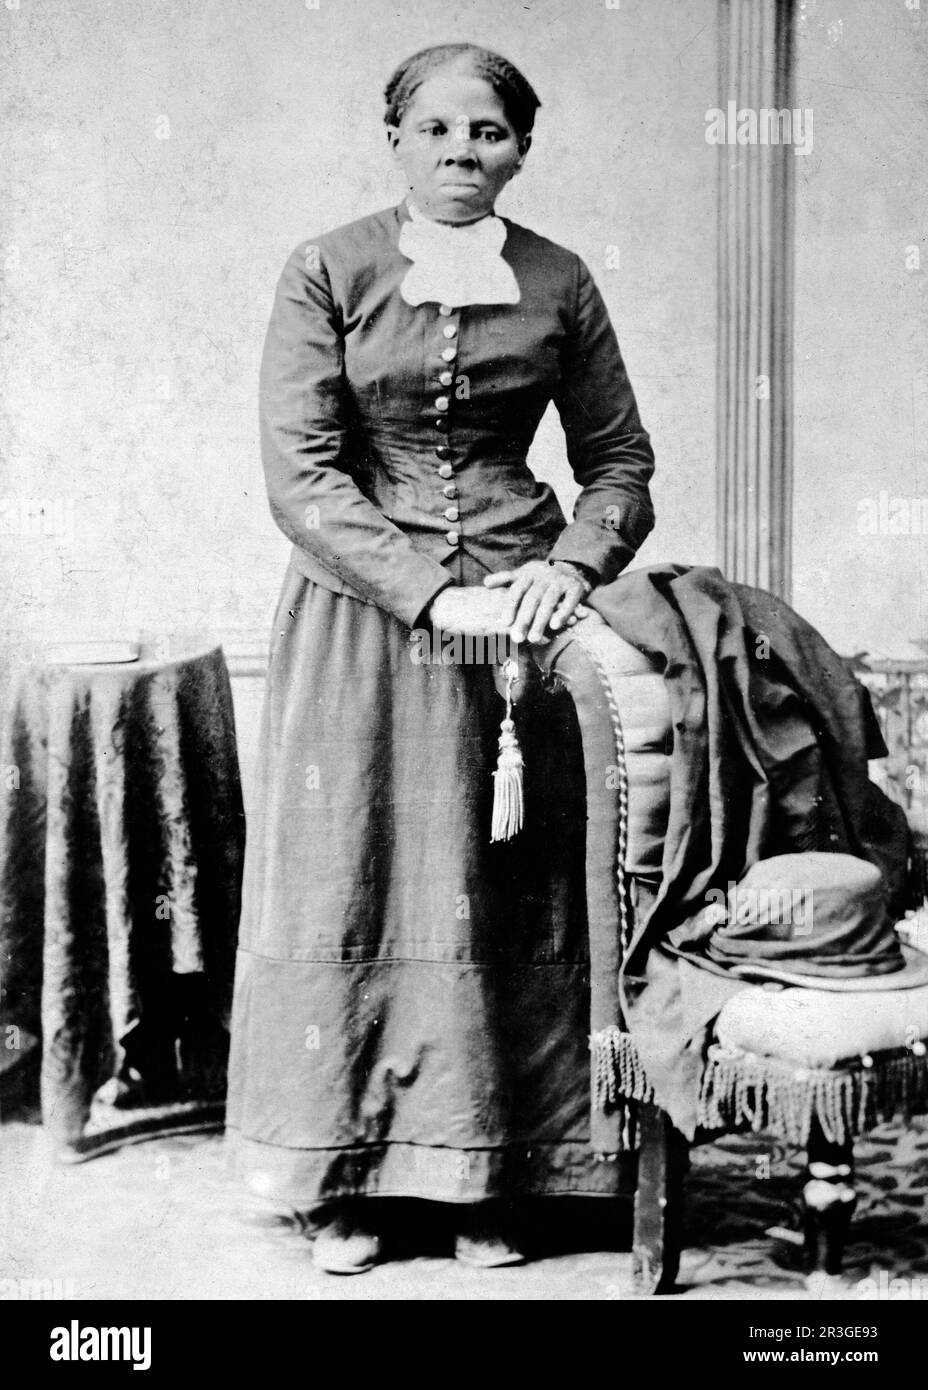 Harriet Tubman, full-length portrait, standing with hands on back of a chair Stock Photo